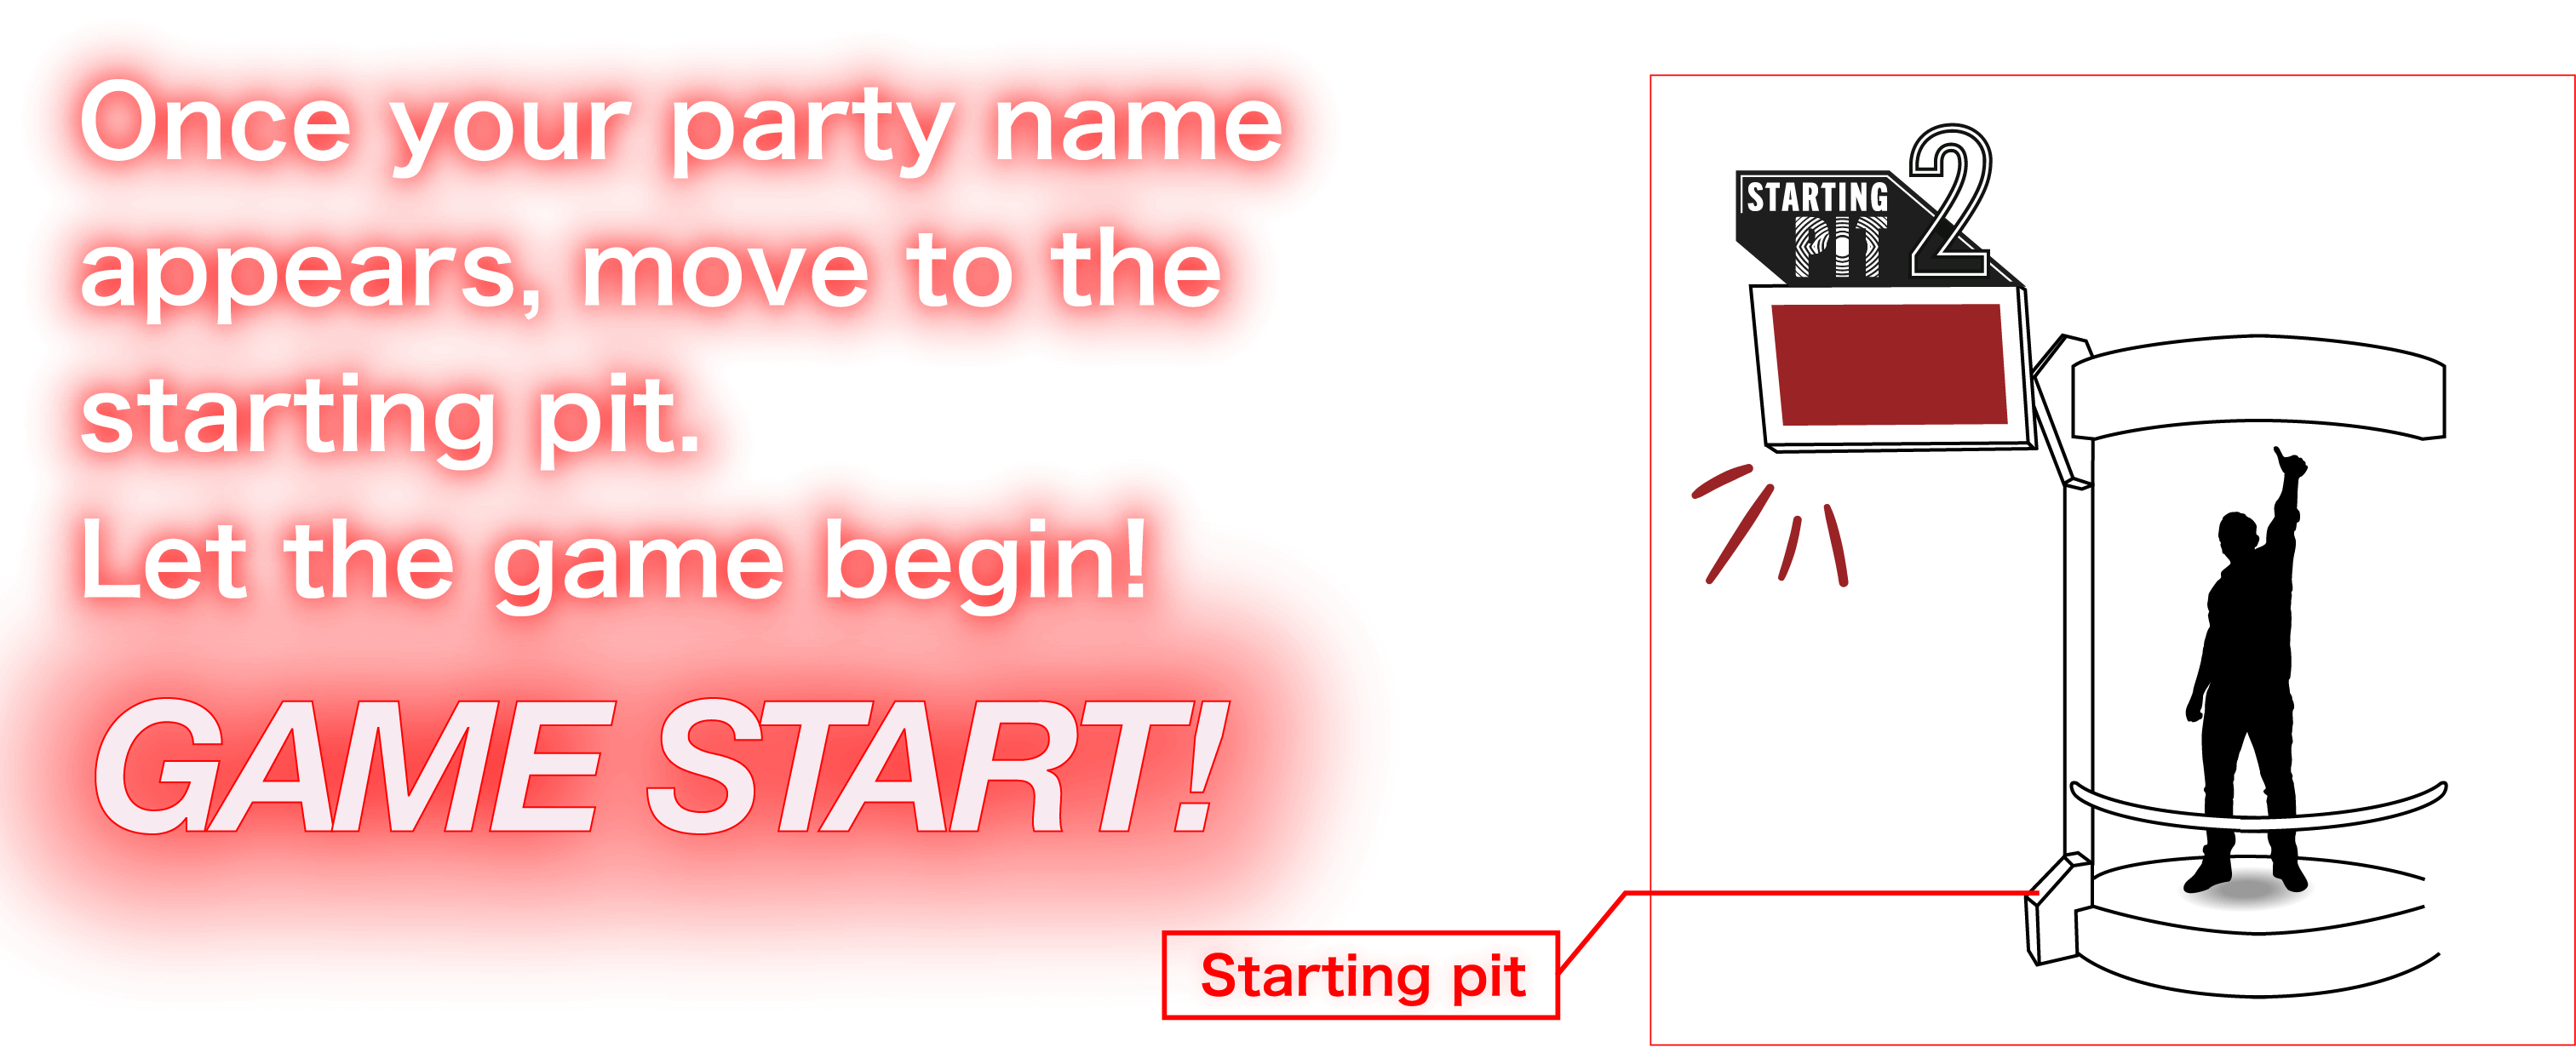 Once your party name appears, move to the starting pit. Let the game begin! GAME START!